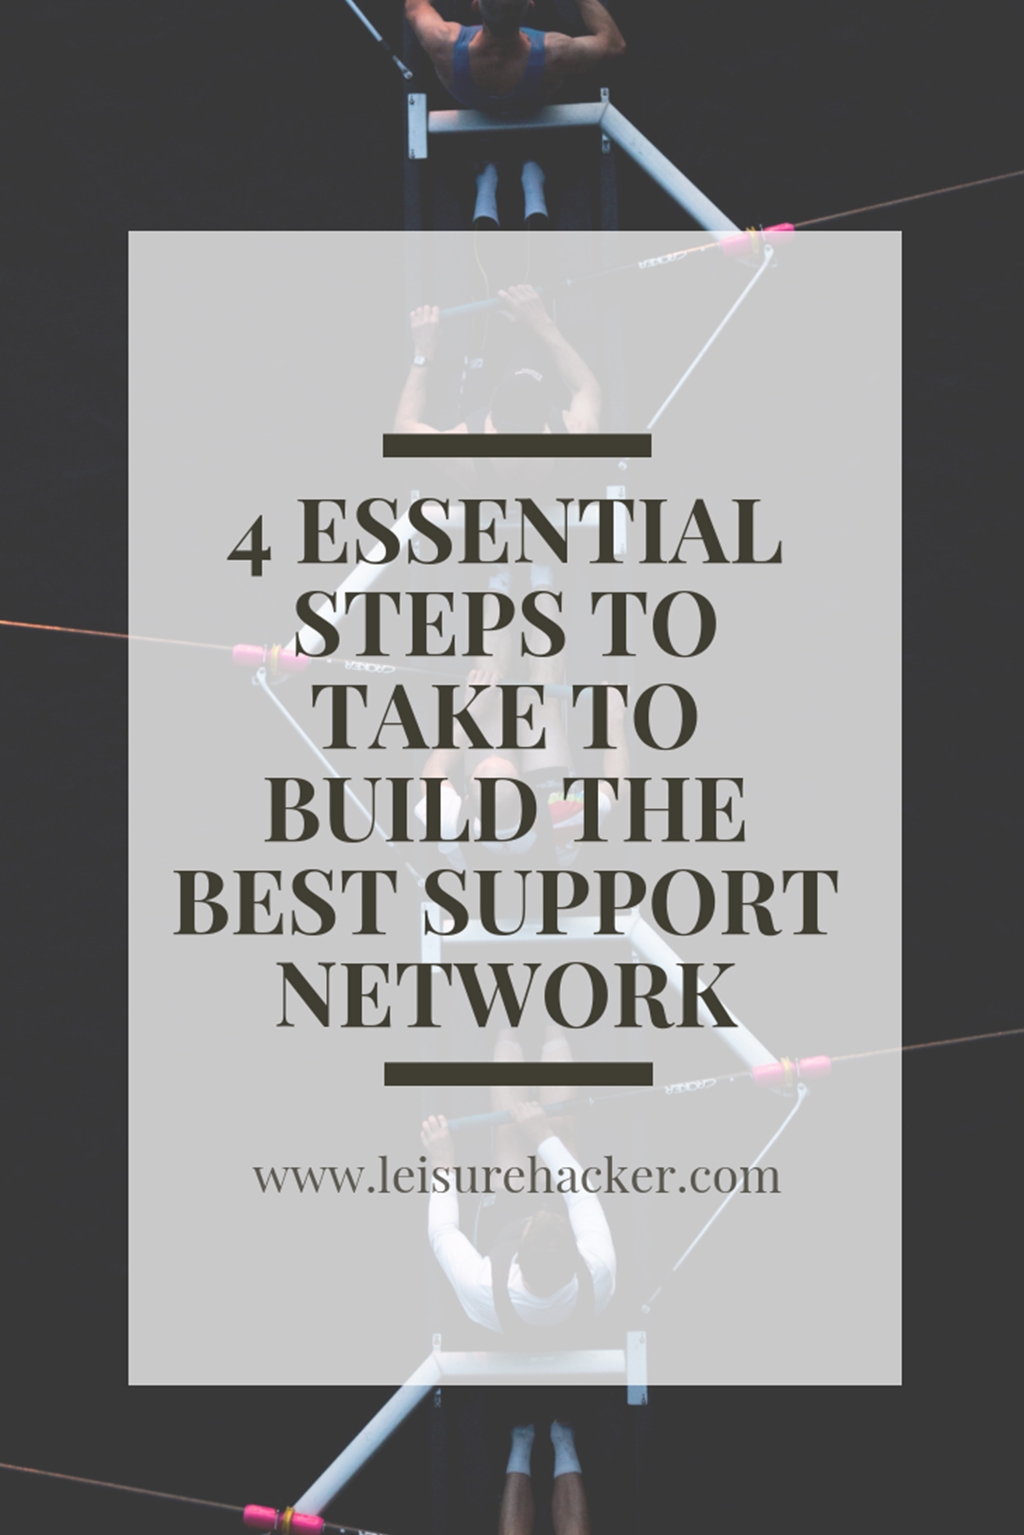 4 essential steps to take to build the best support network